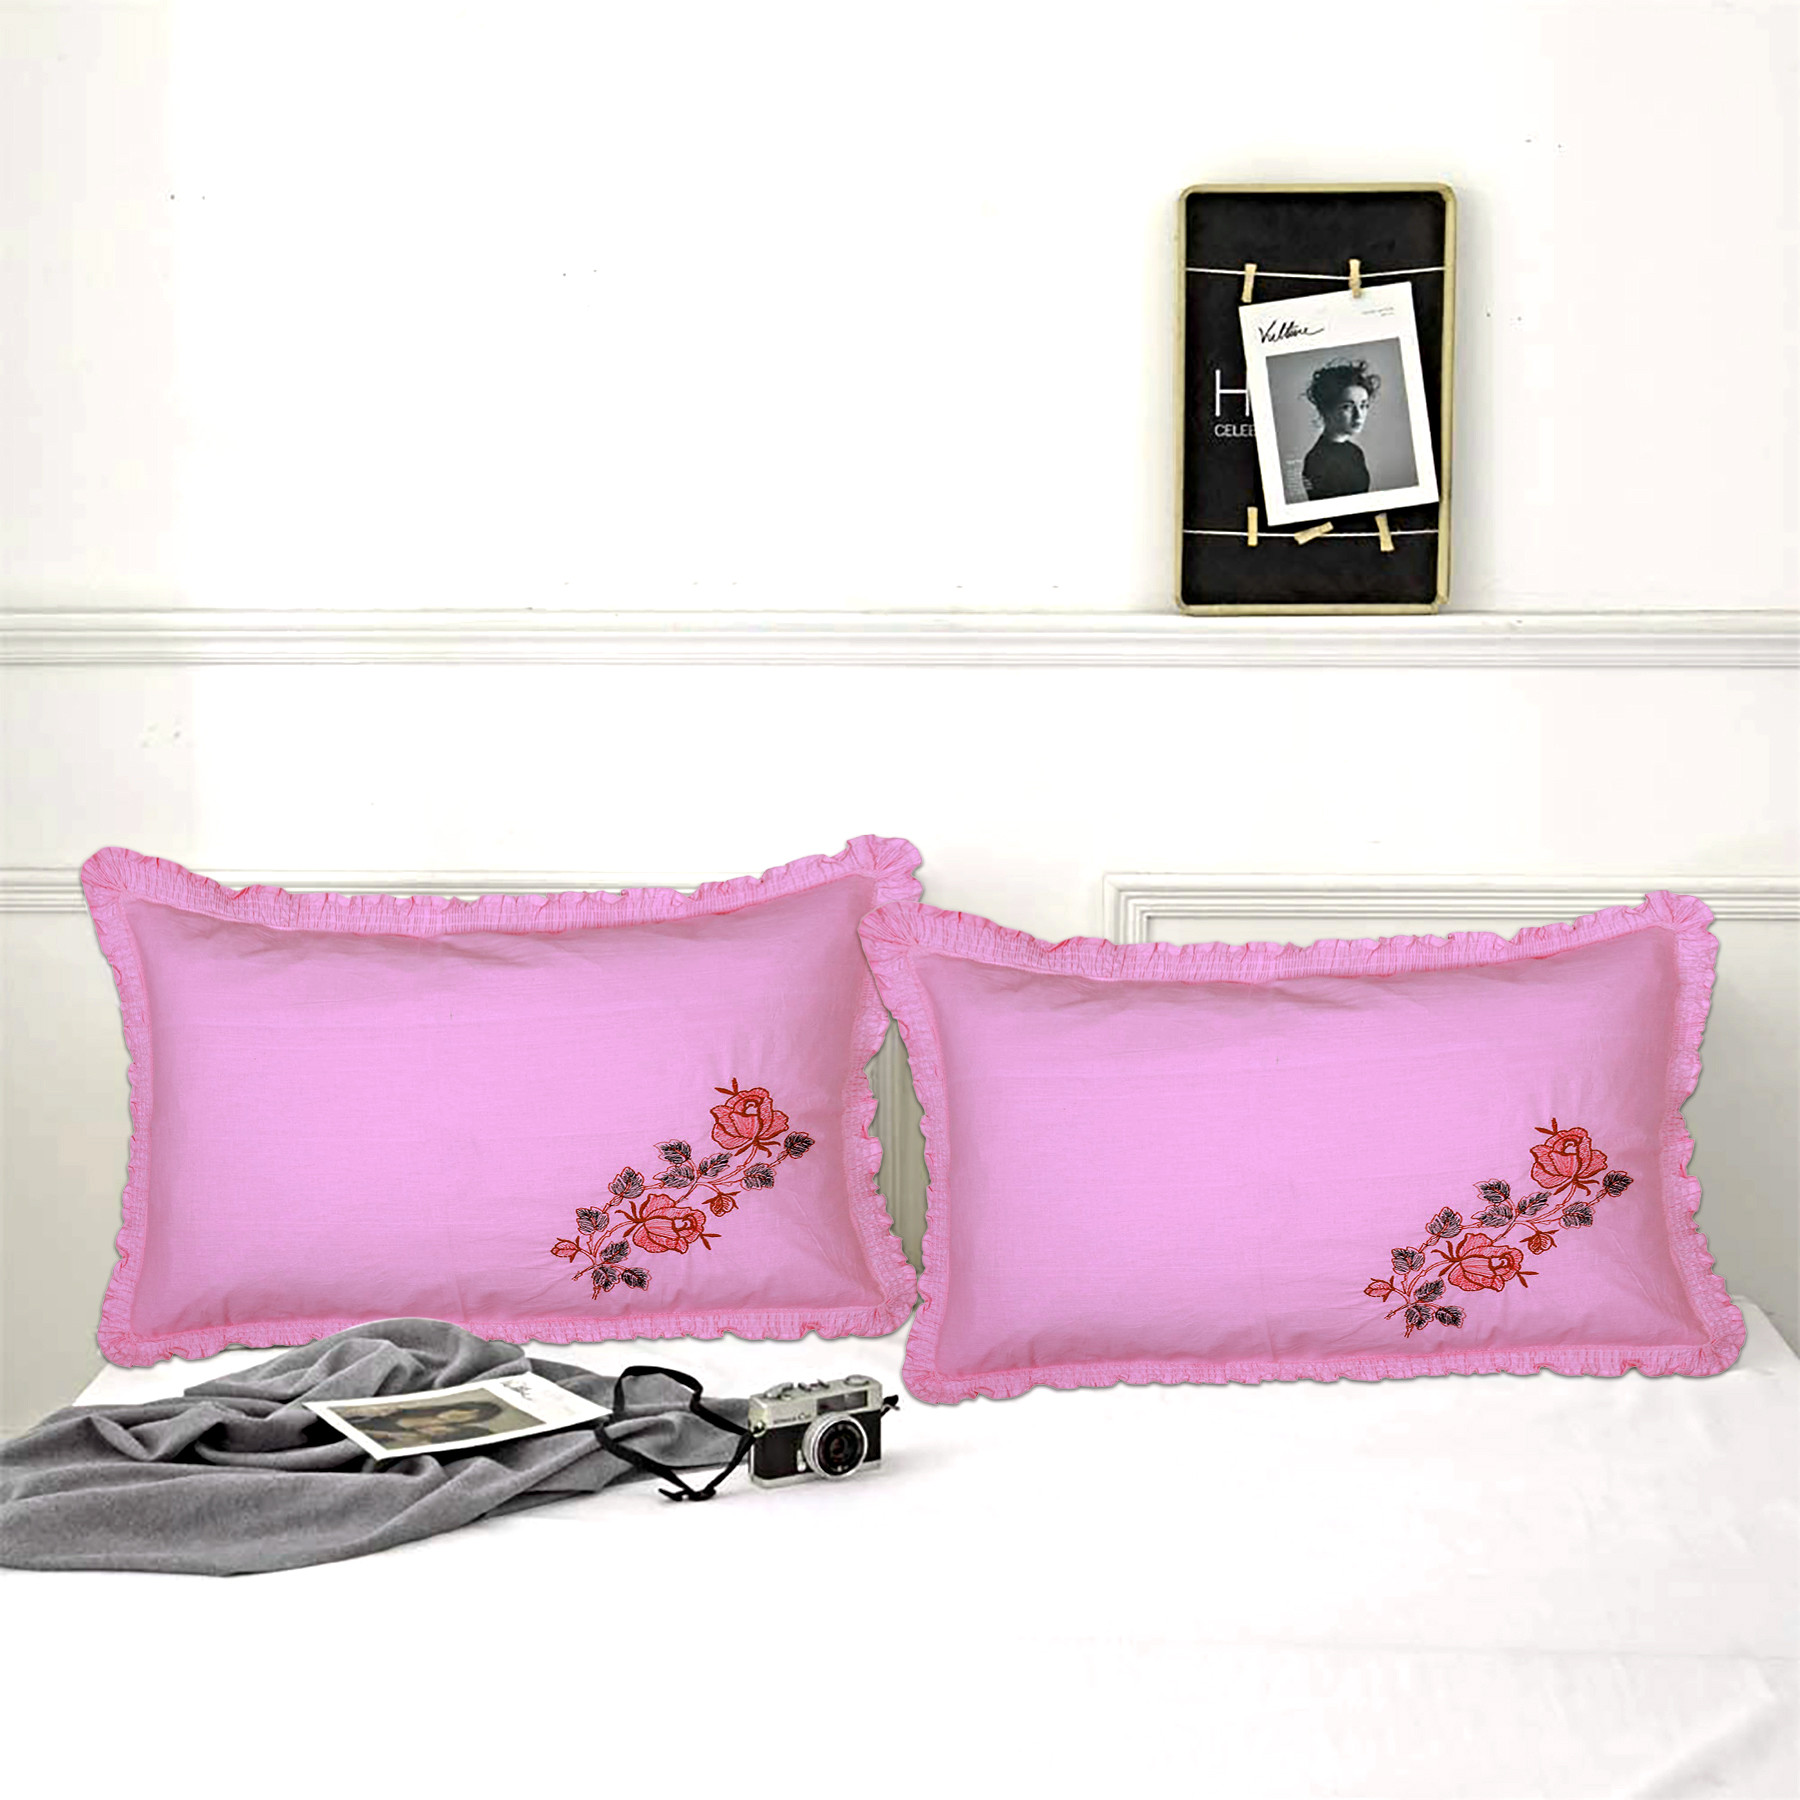 Kuber Industries Embroidery Pattern Breathable & Soft Cotton Pillow Cover For Sofa, Couch, Bed, (Pink) 54KM4119